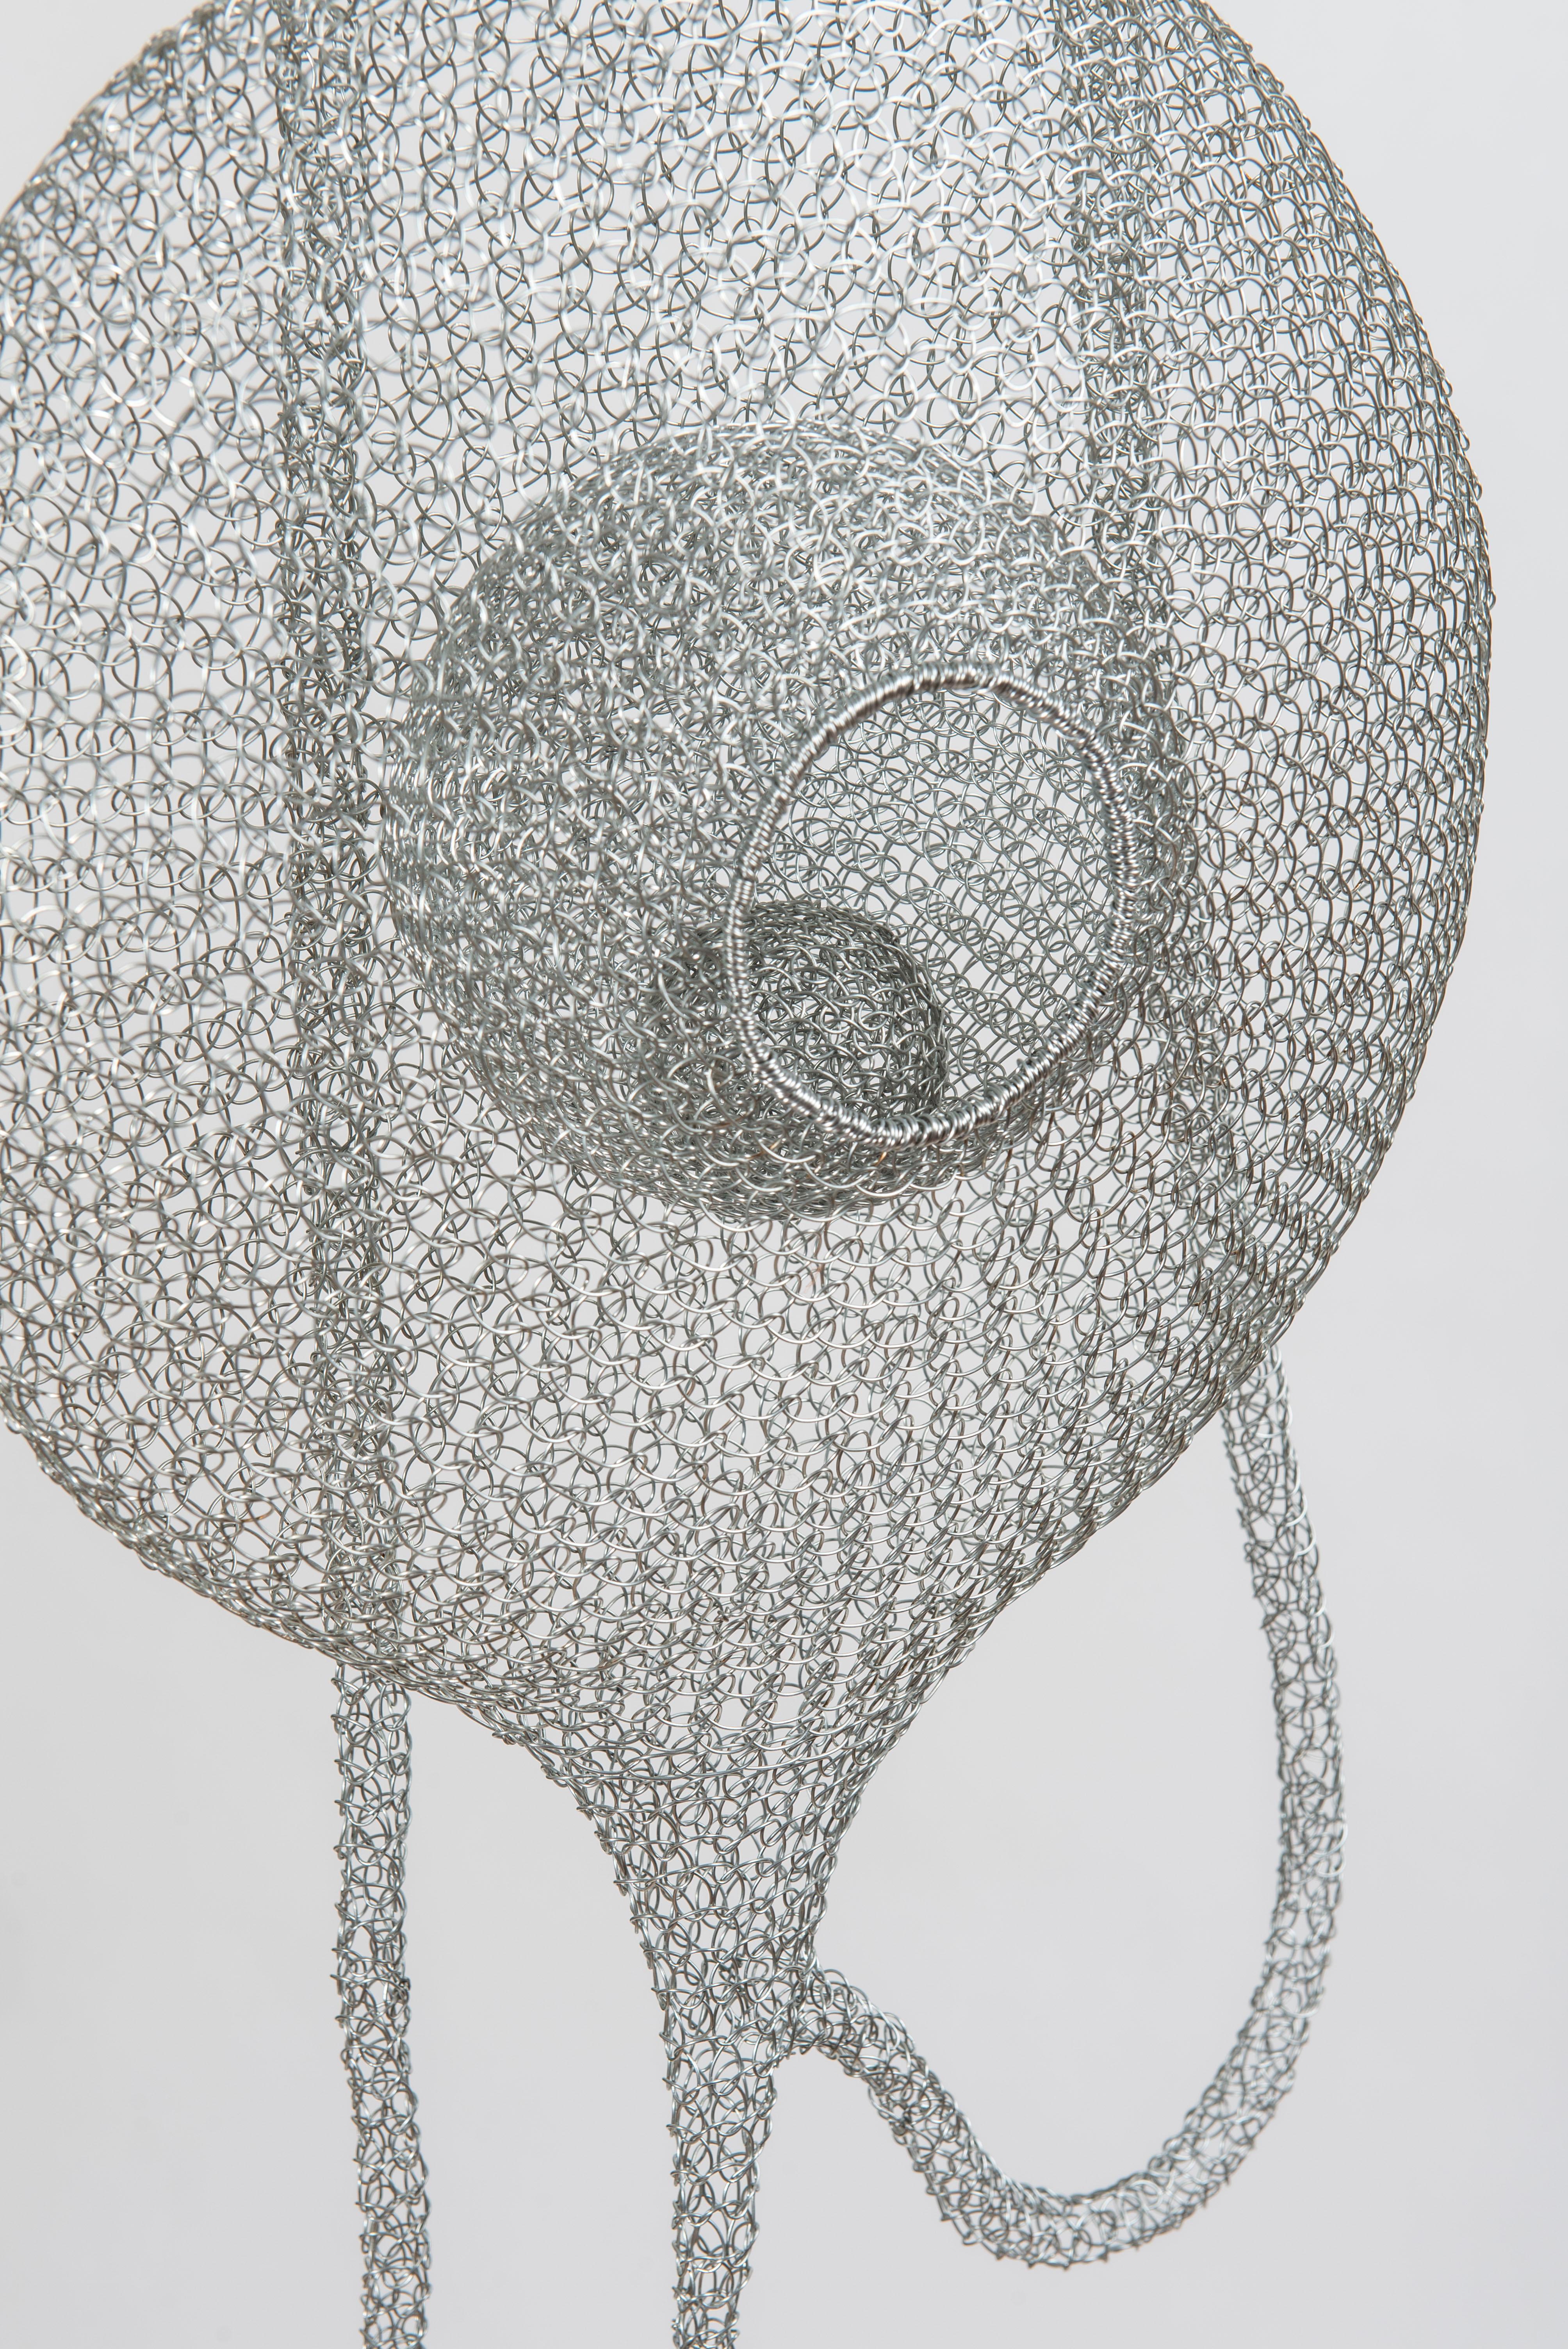 An airy meshwork of aesthetic shapes combining with felted green wool, this sensual sculpture named « Safe harbor I» is created and entirely handmade from silver-grey galvanized iron wire and felting wool by artist Delphine Grandvaux. The artist